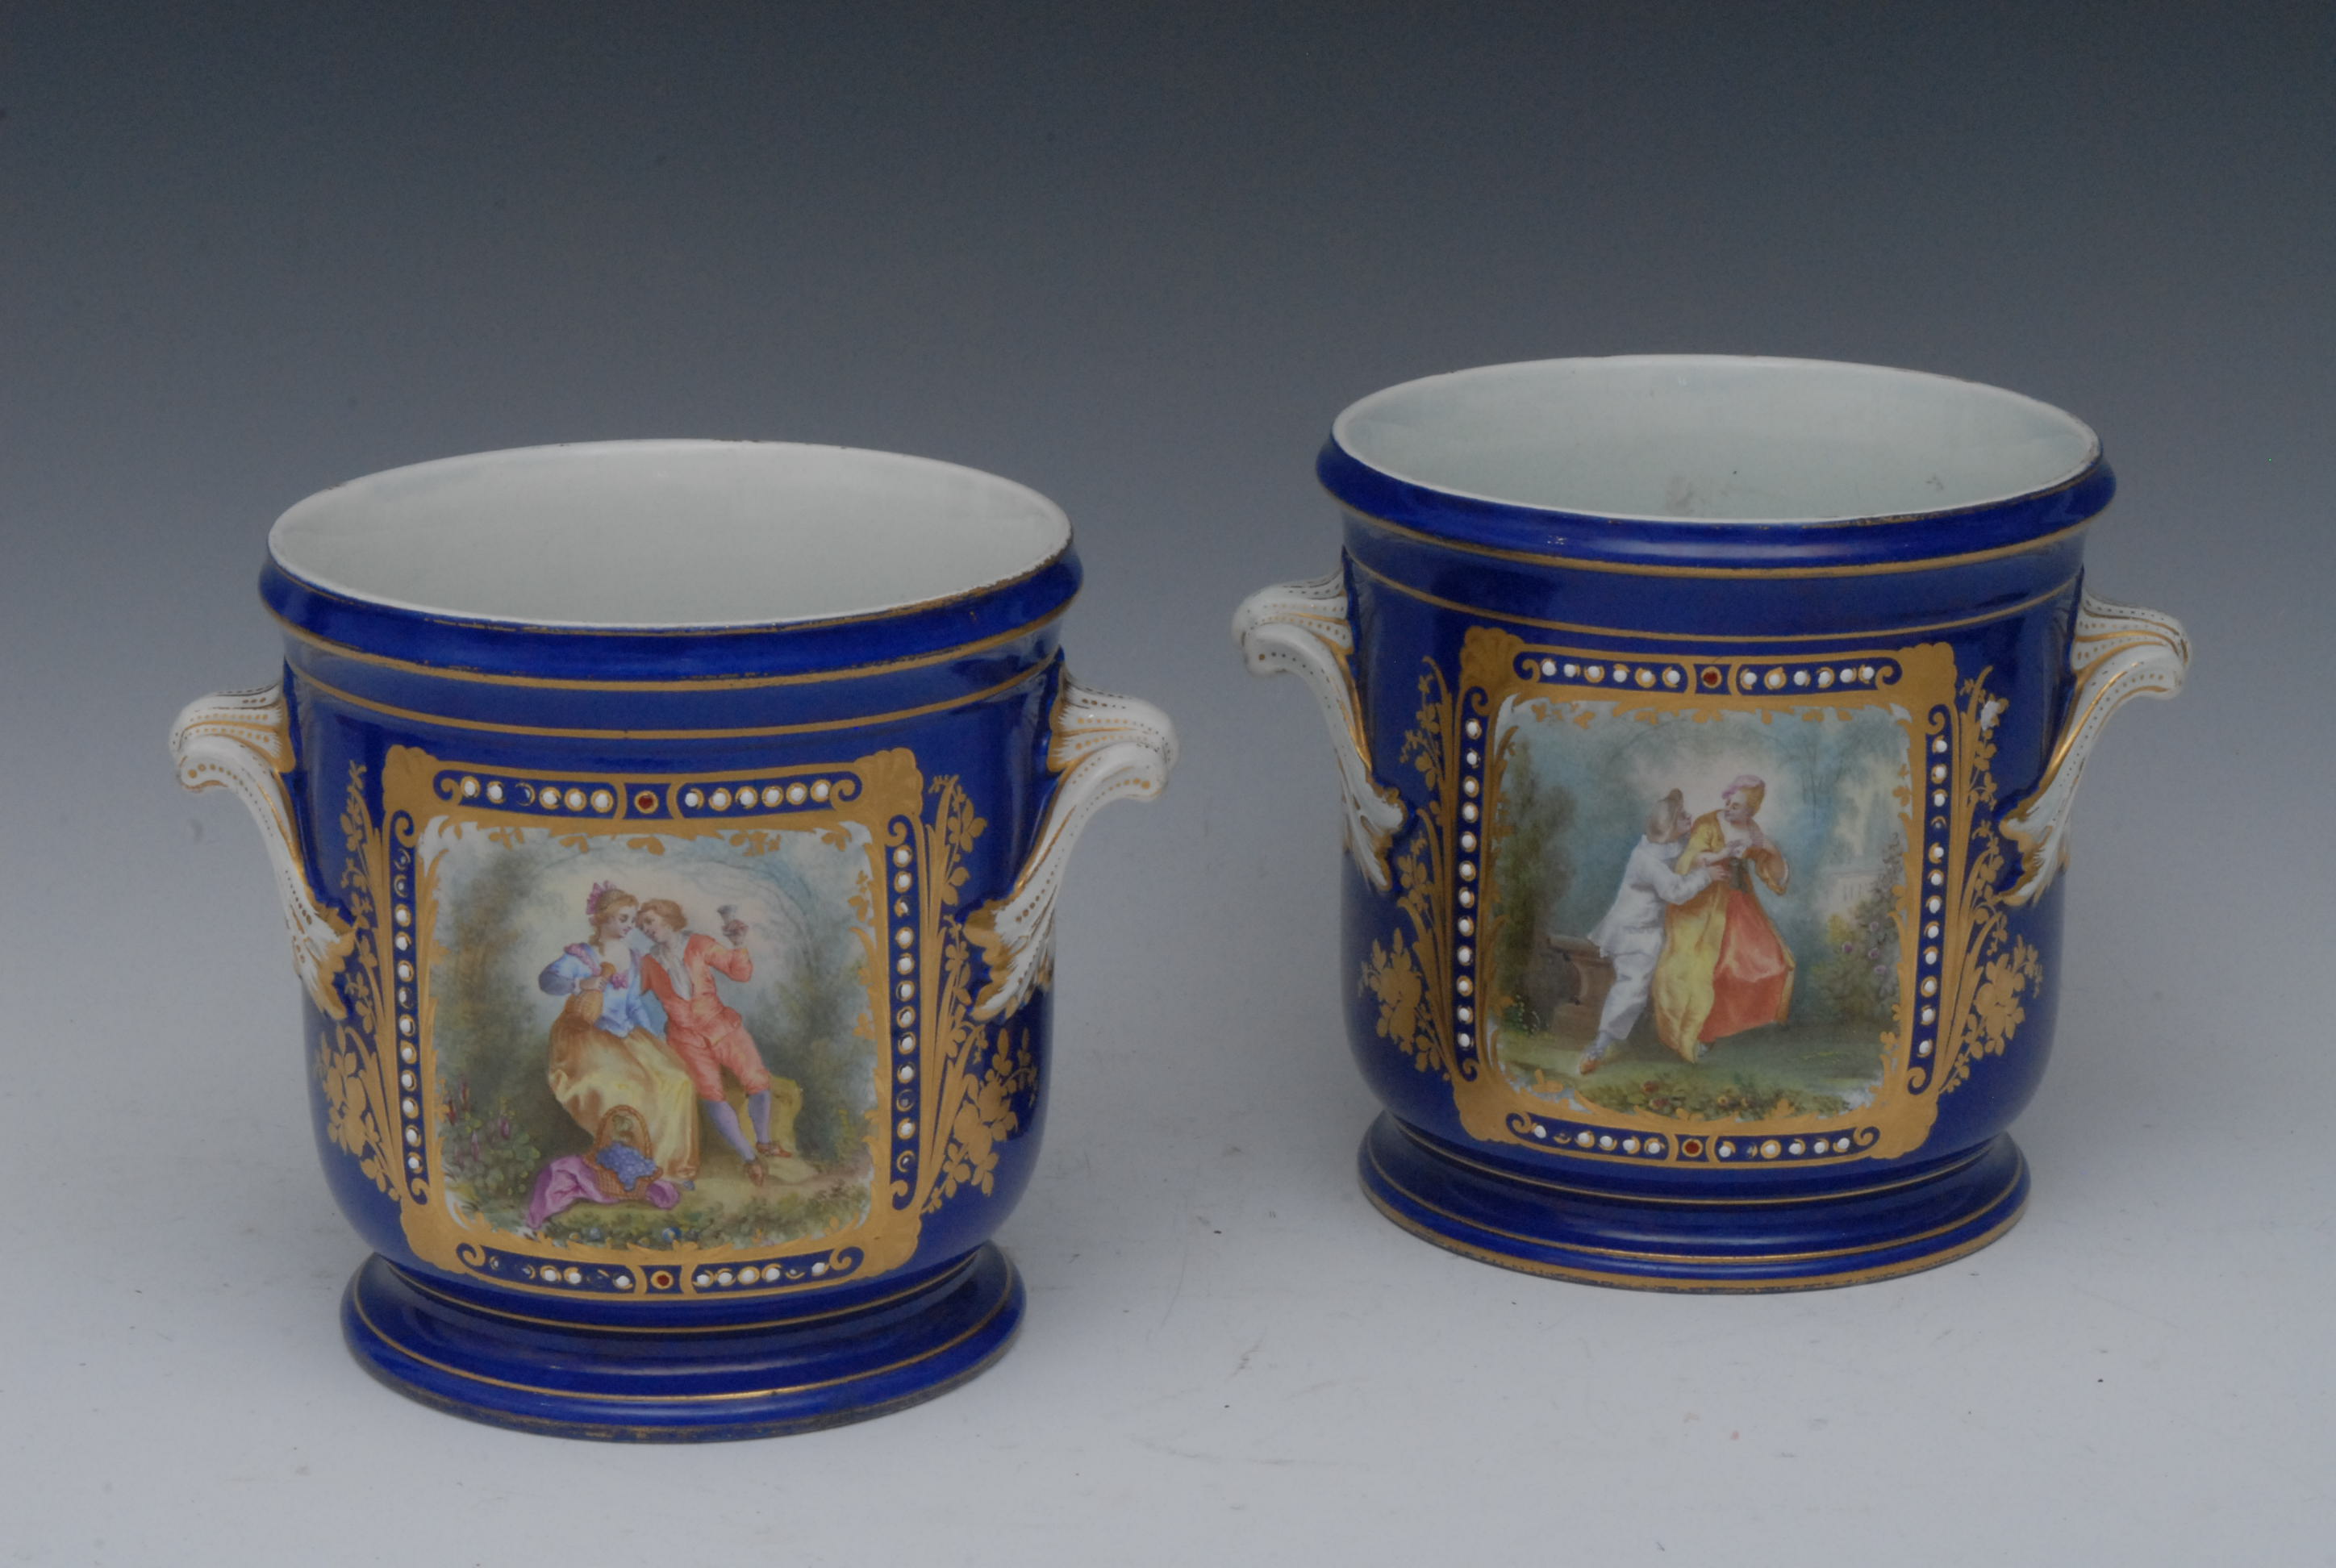 A pair of French cache pots, in the manner of Sevres, decorated with rounded rectangular reserves